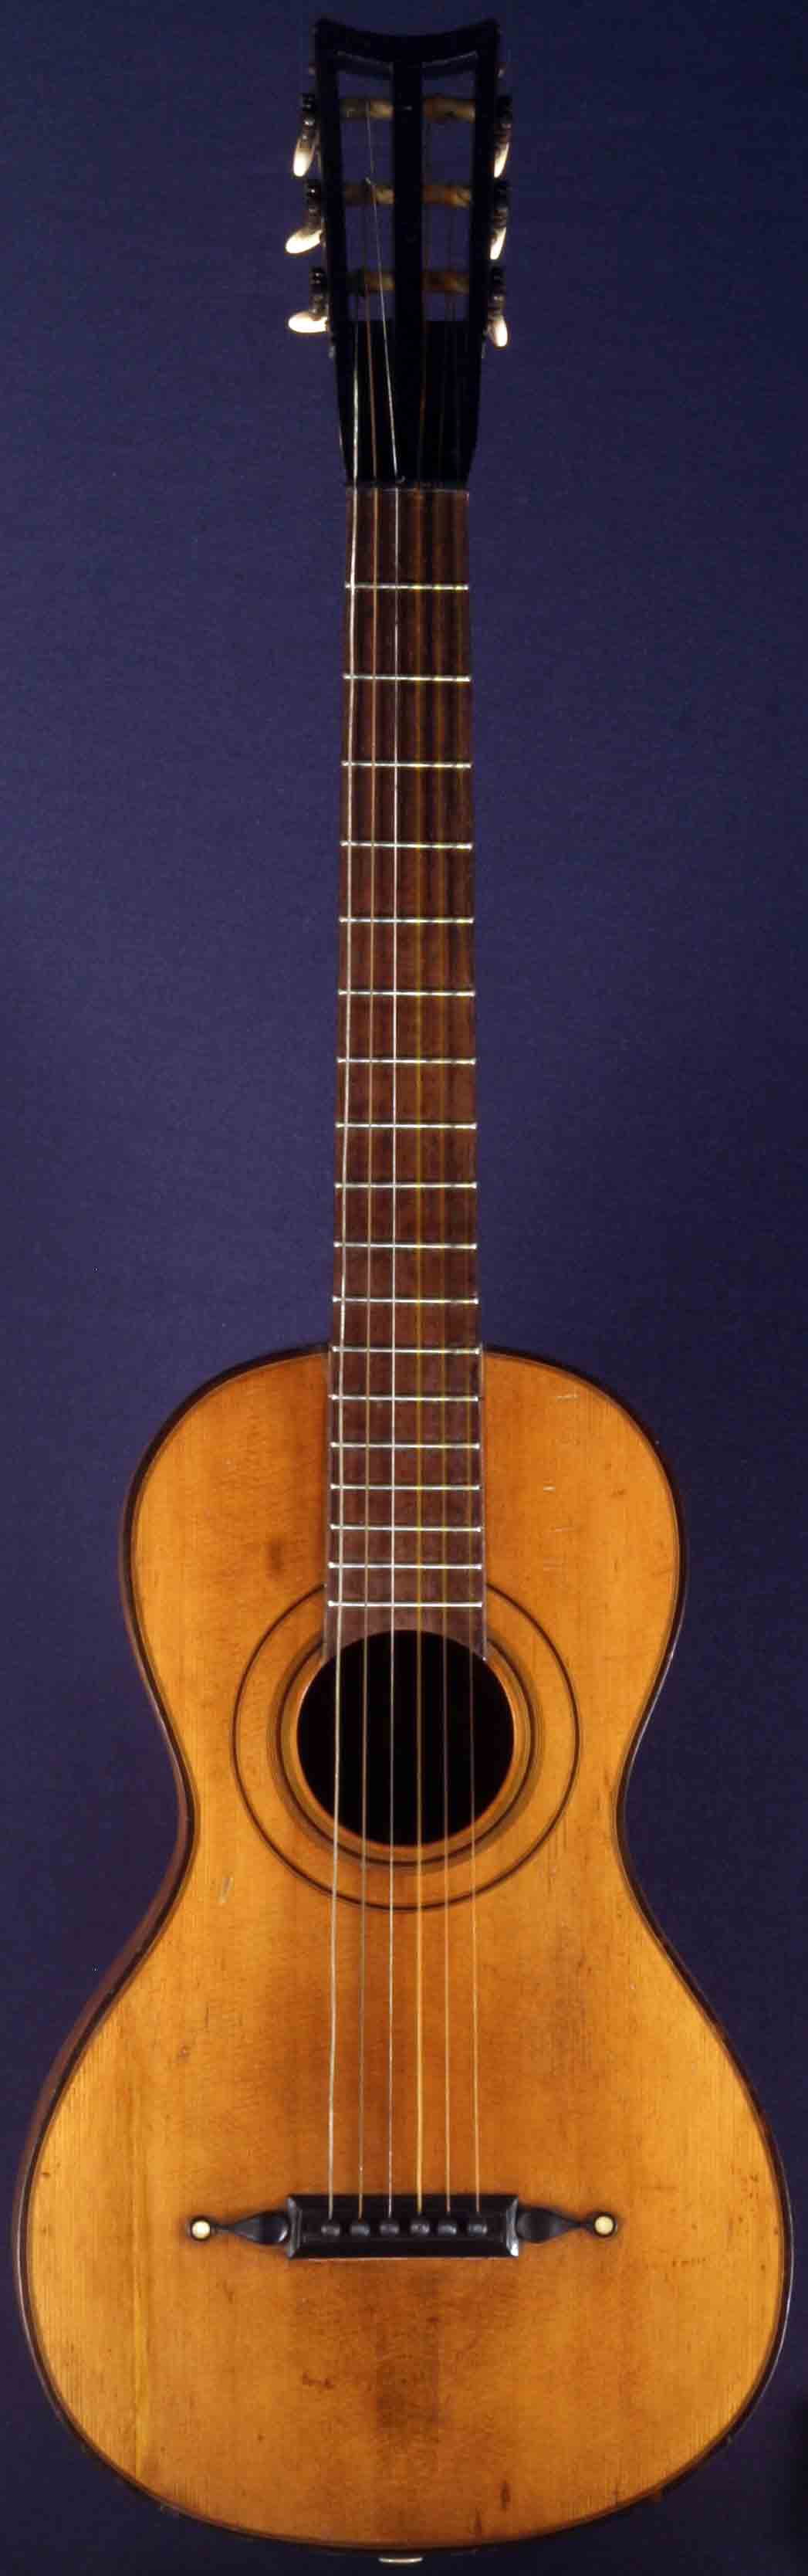 Early Musical Instruments part of the Bruderlin Collection, antique Romantic Guitar by Louis Panormo dated 1829